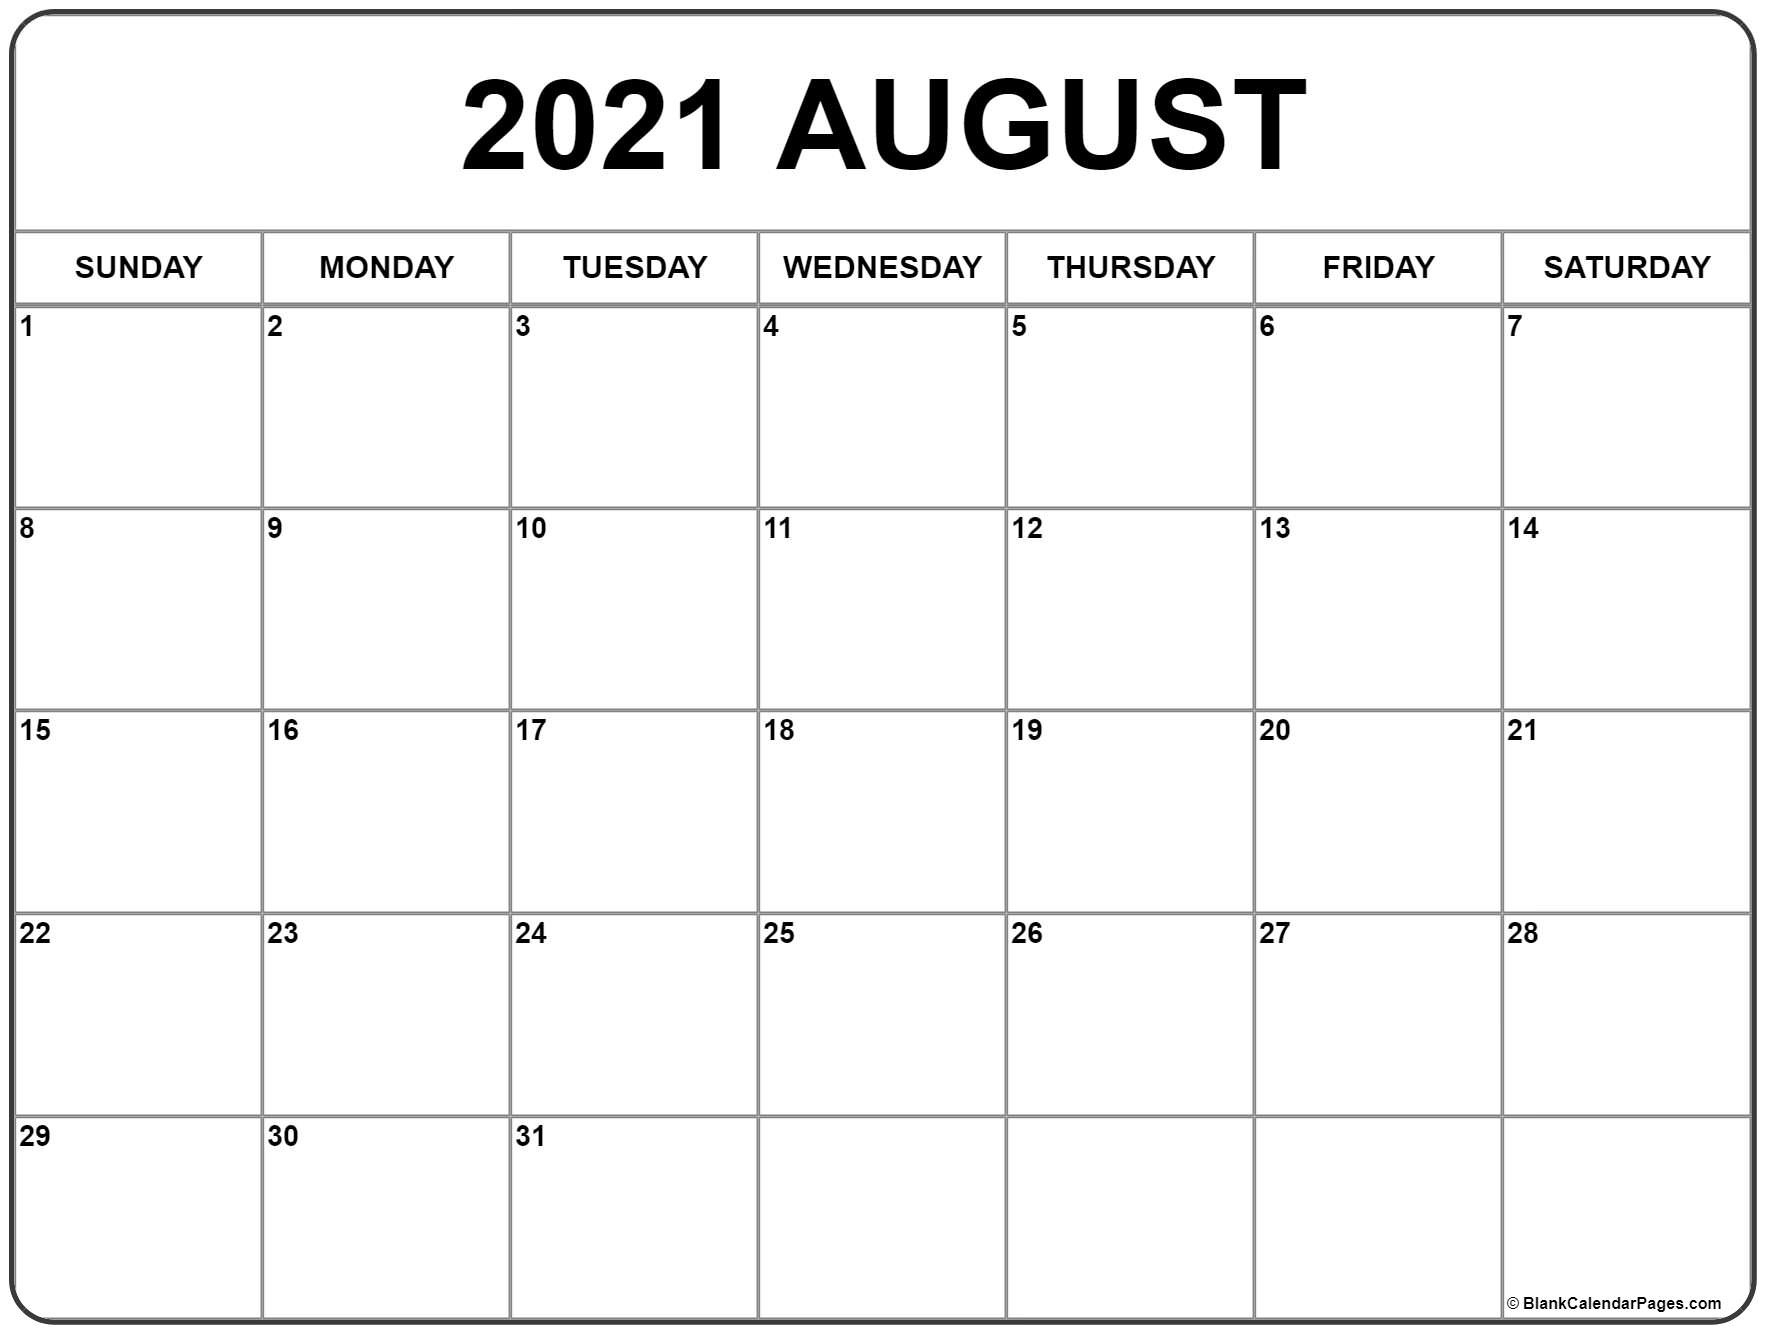 August 2021 Calendar | Free Printable Monthly Calendars-June July August 2021 Calendar Free Printable